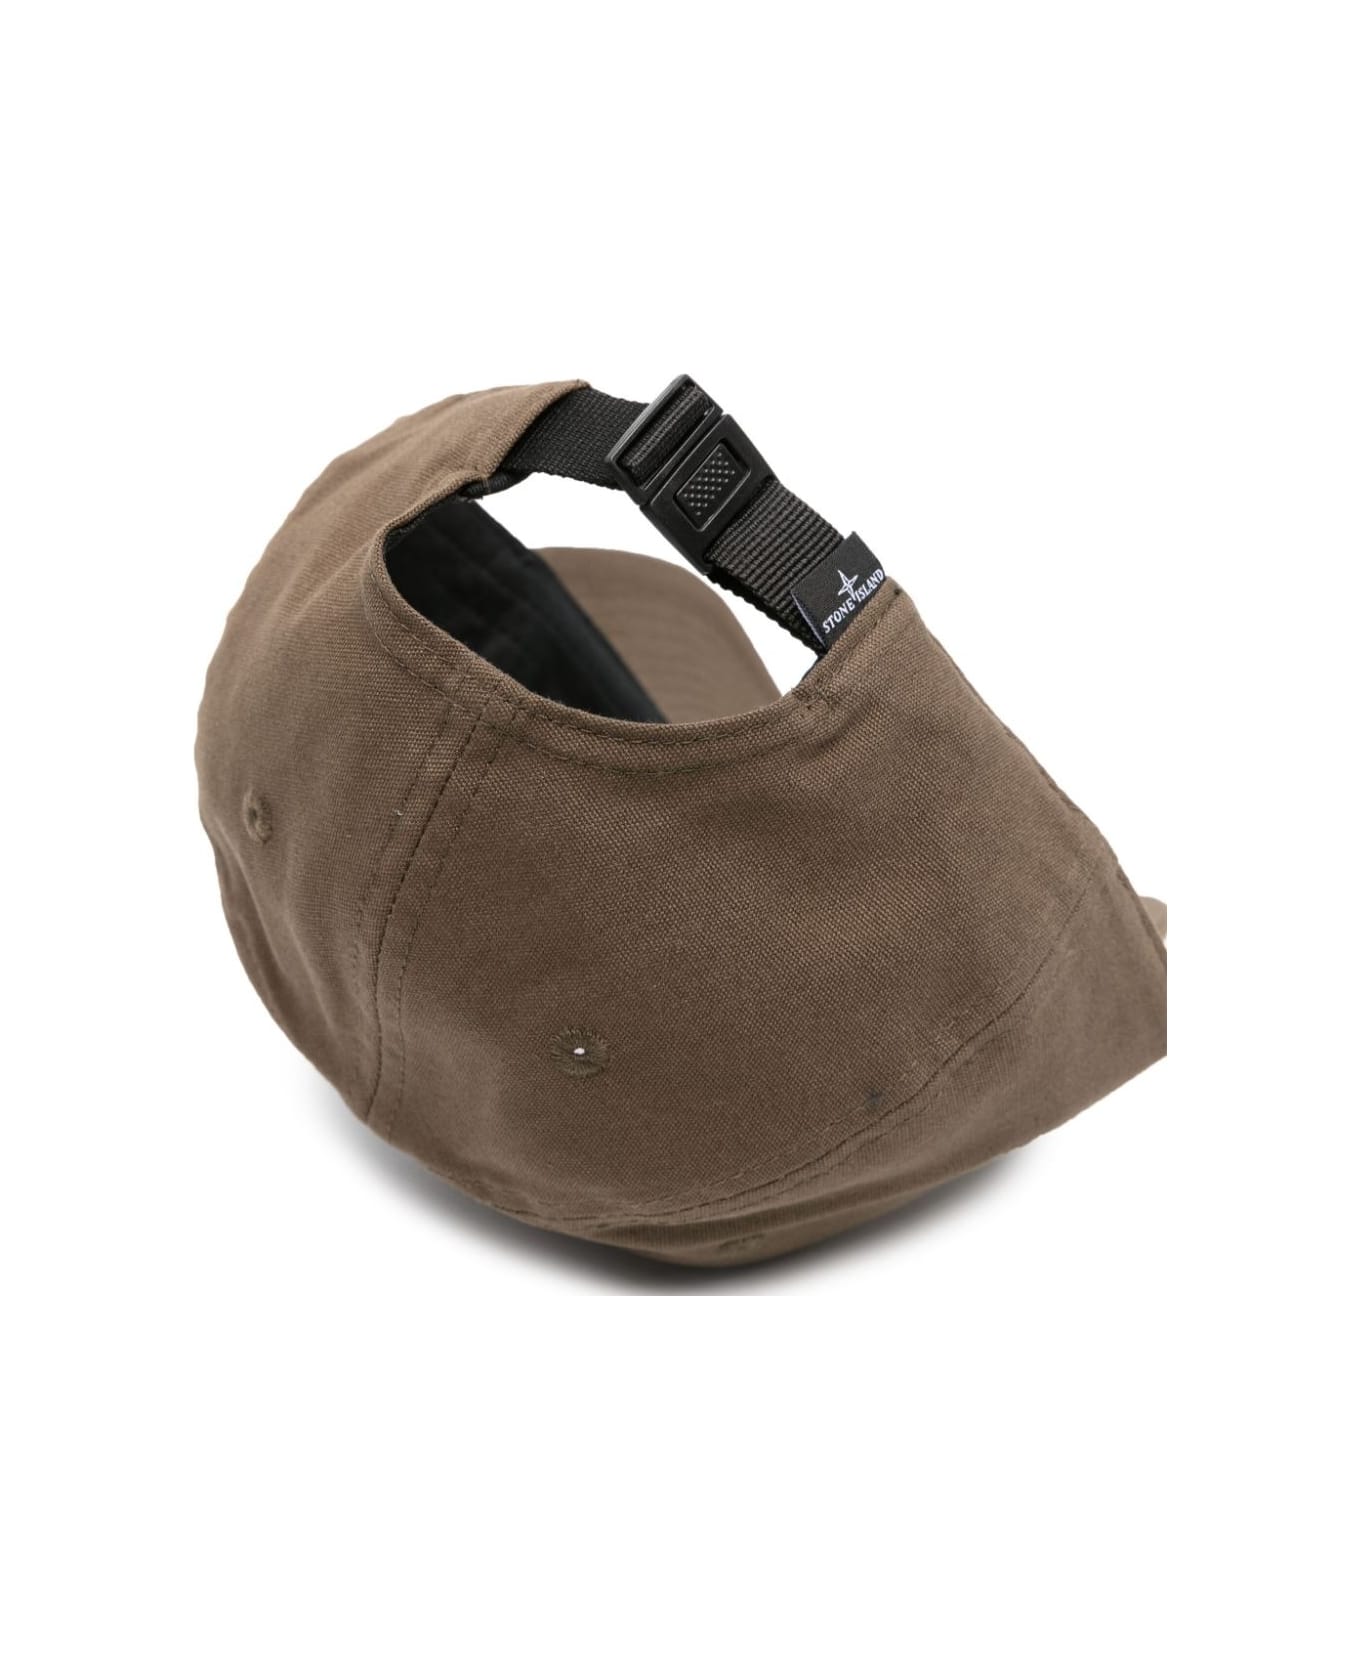 Stone Island Military Green Baseball Claudette Hat With Embossed Print - Brown